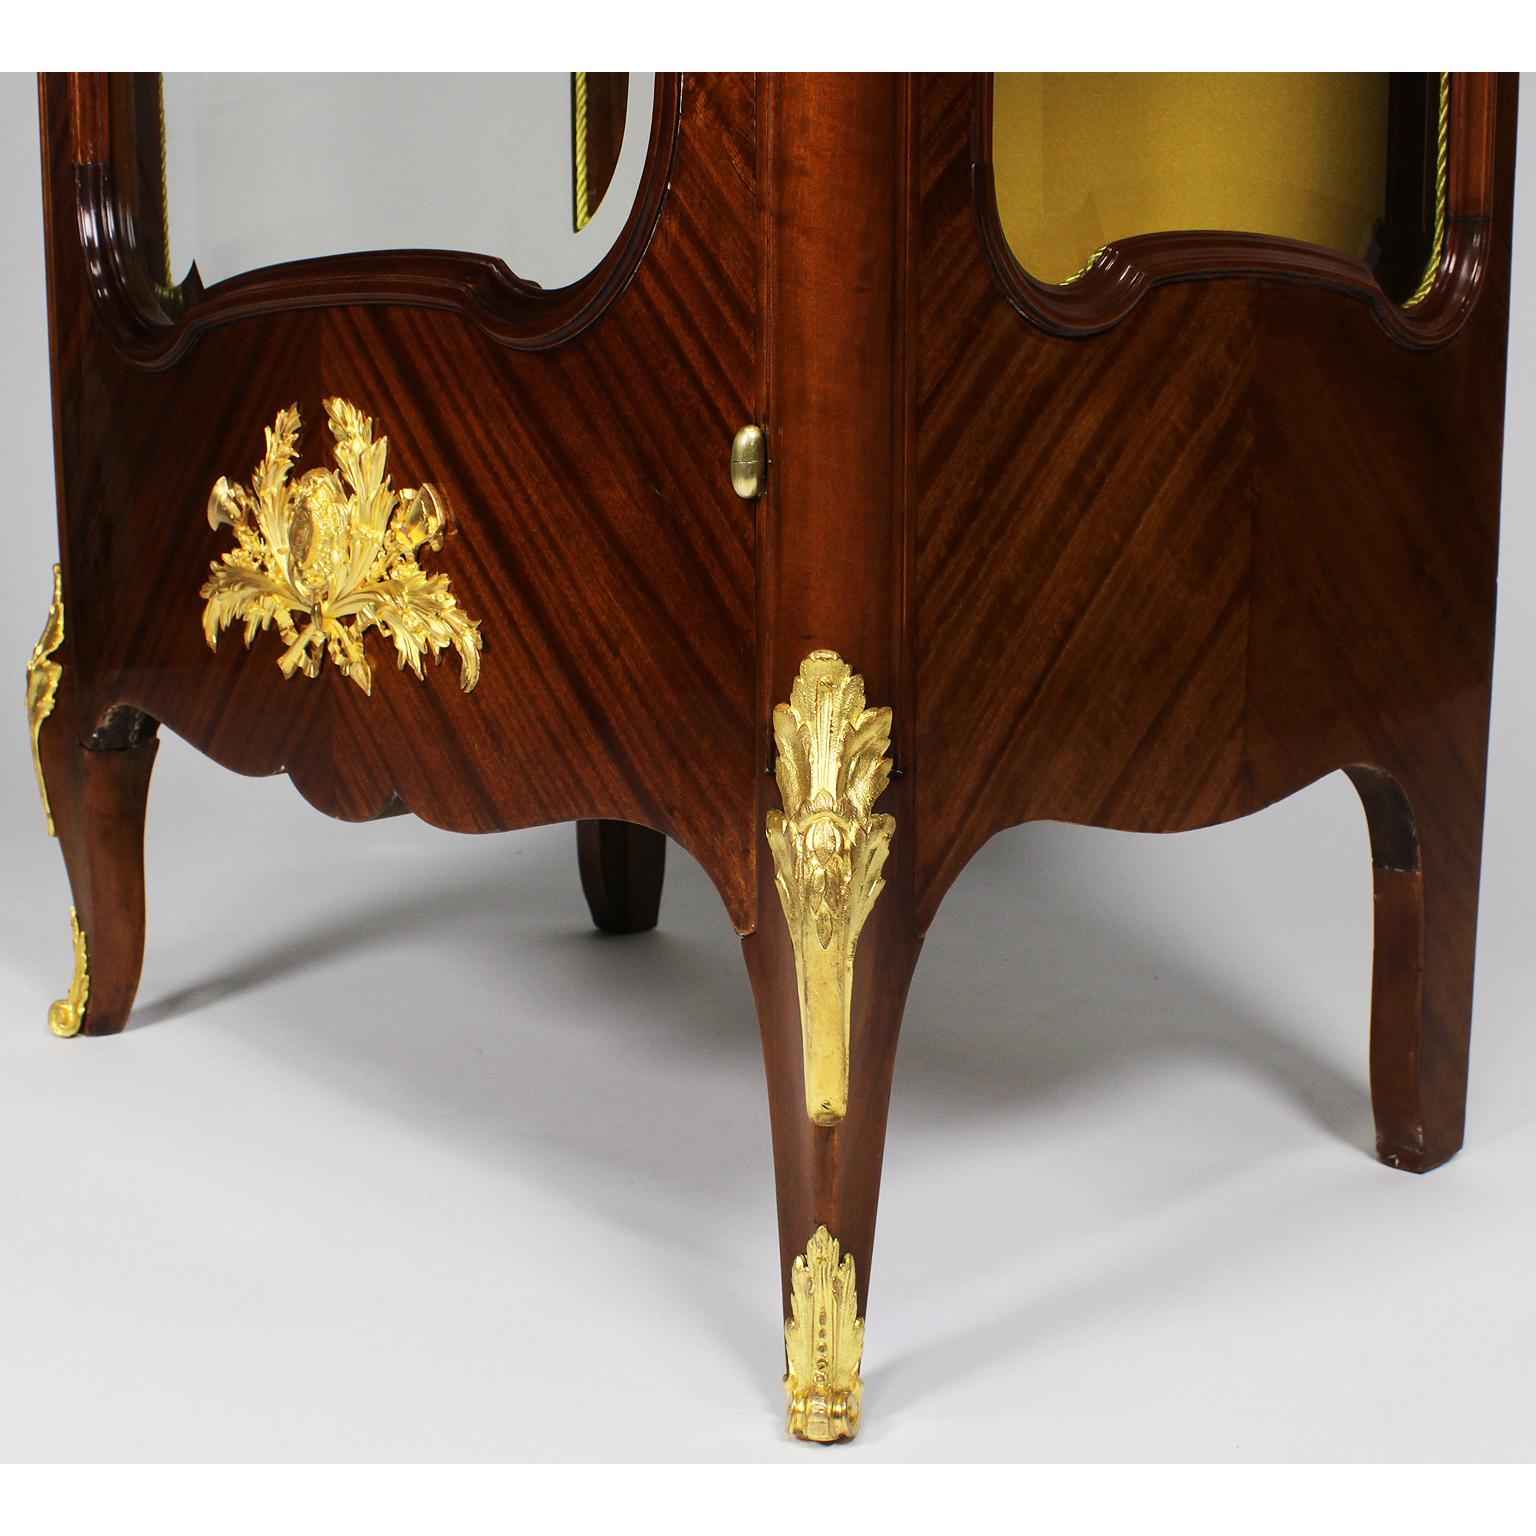 Fine French 19th-20th Century Louis XV Style Ormolu-Mounted Tulipwood Vitrine For Sale 2